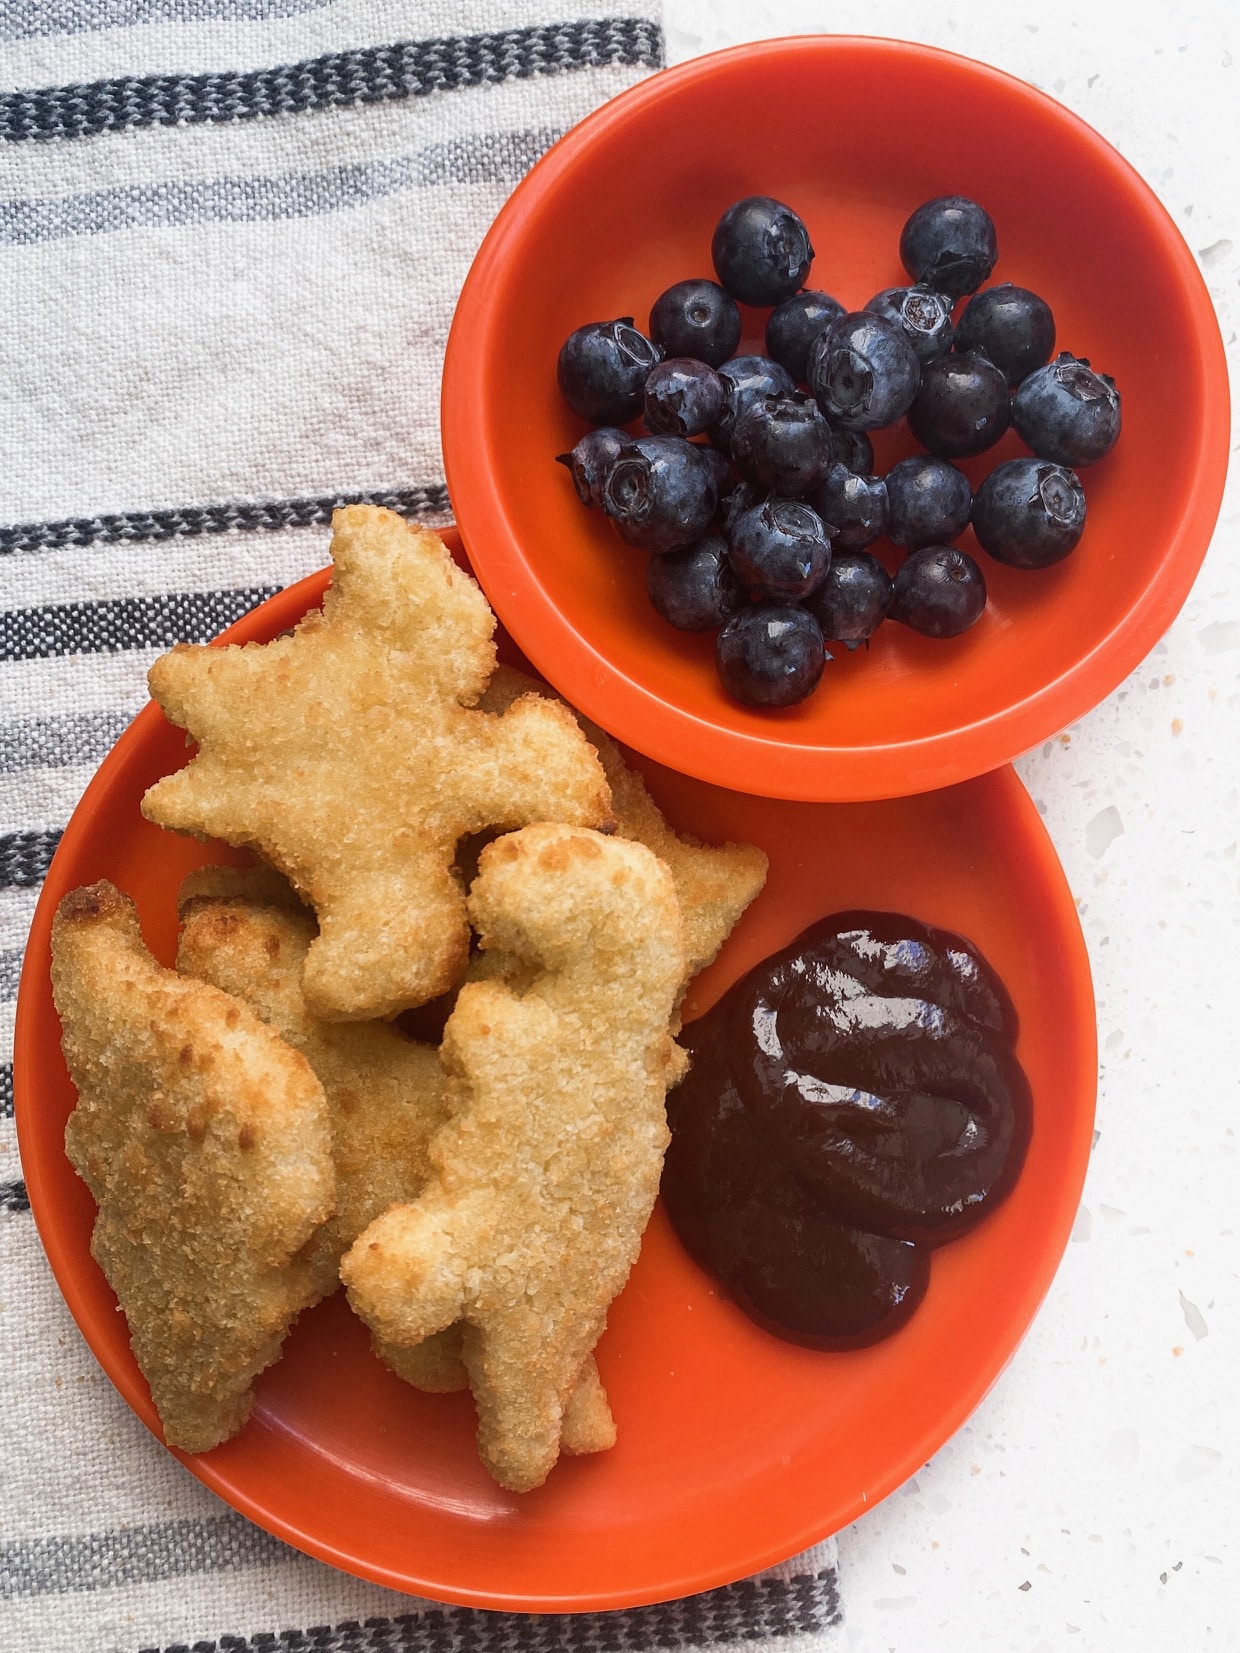 blueberries, bbq sauce, and chicken nuggets on an orange plate